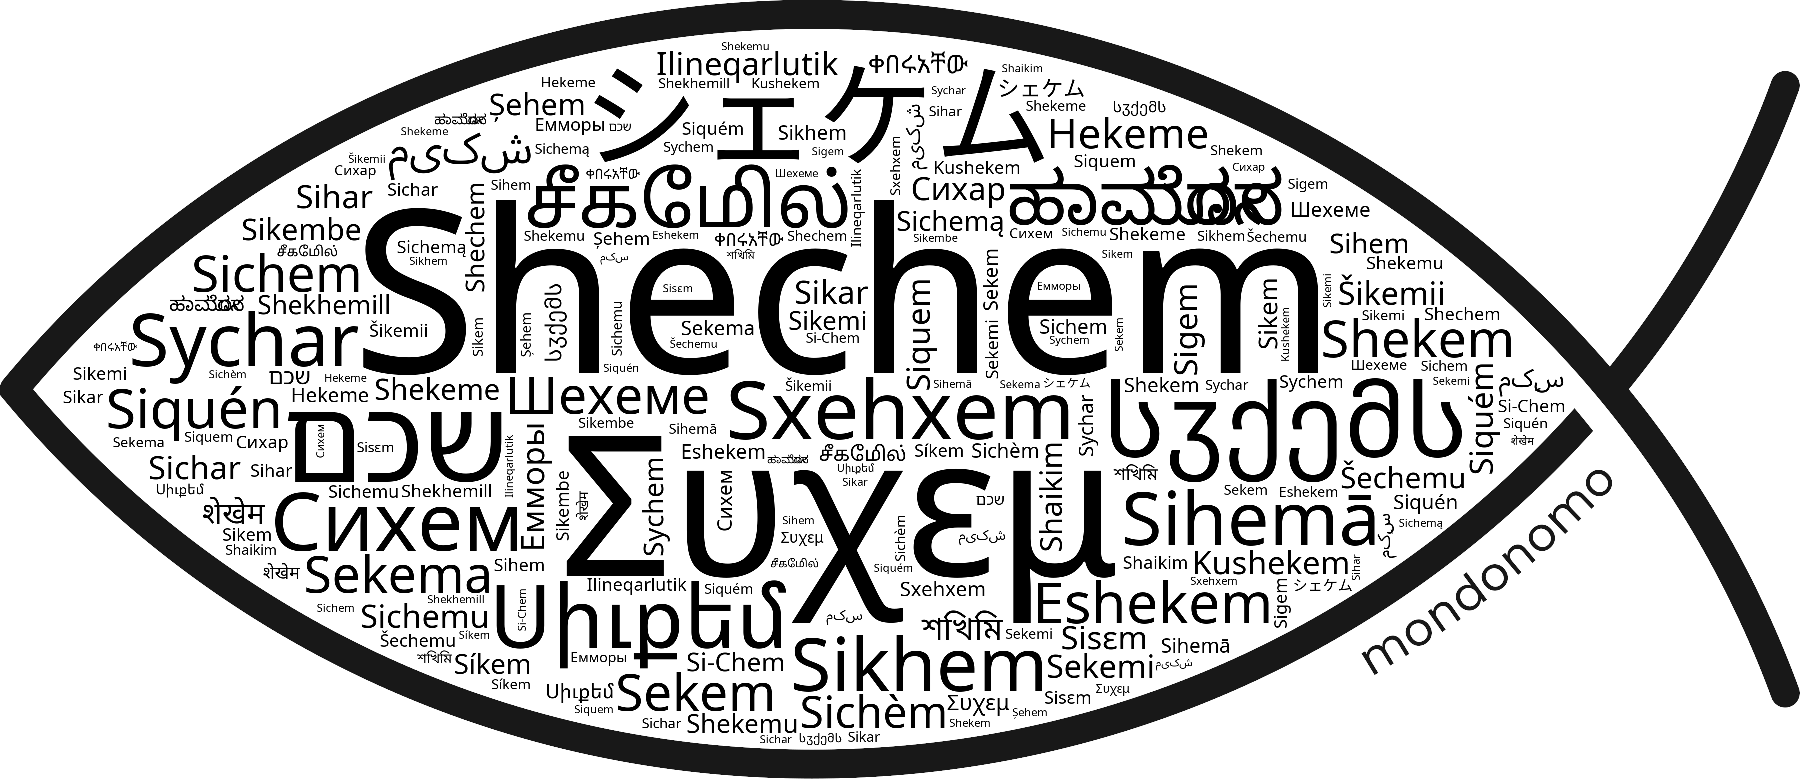 Name Shechem in the world's Bibles